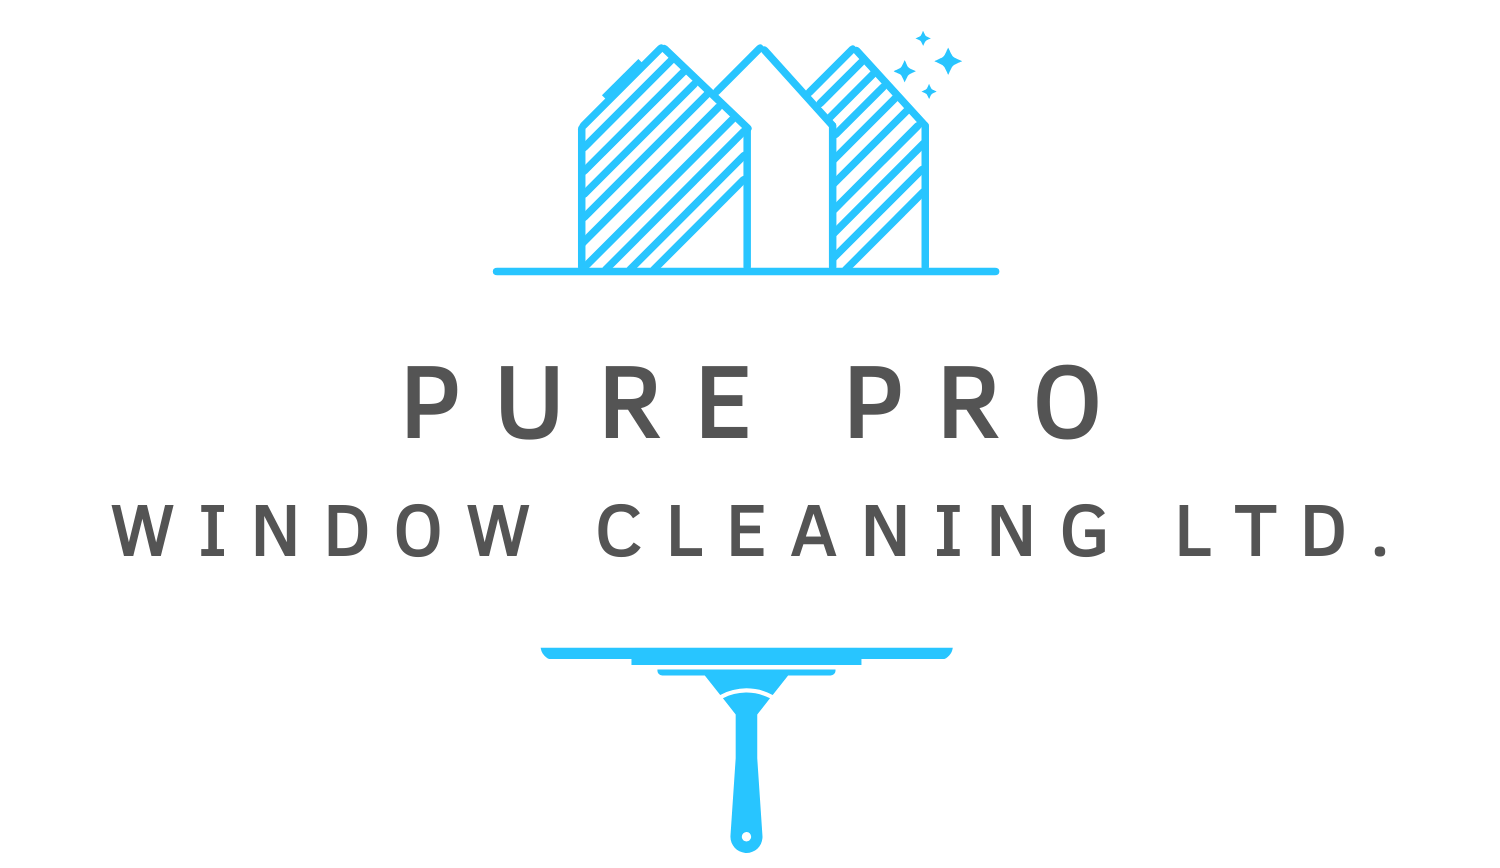 About Pure Pro Window Cleaning